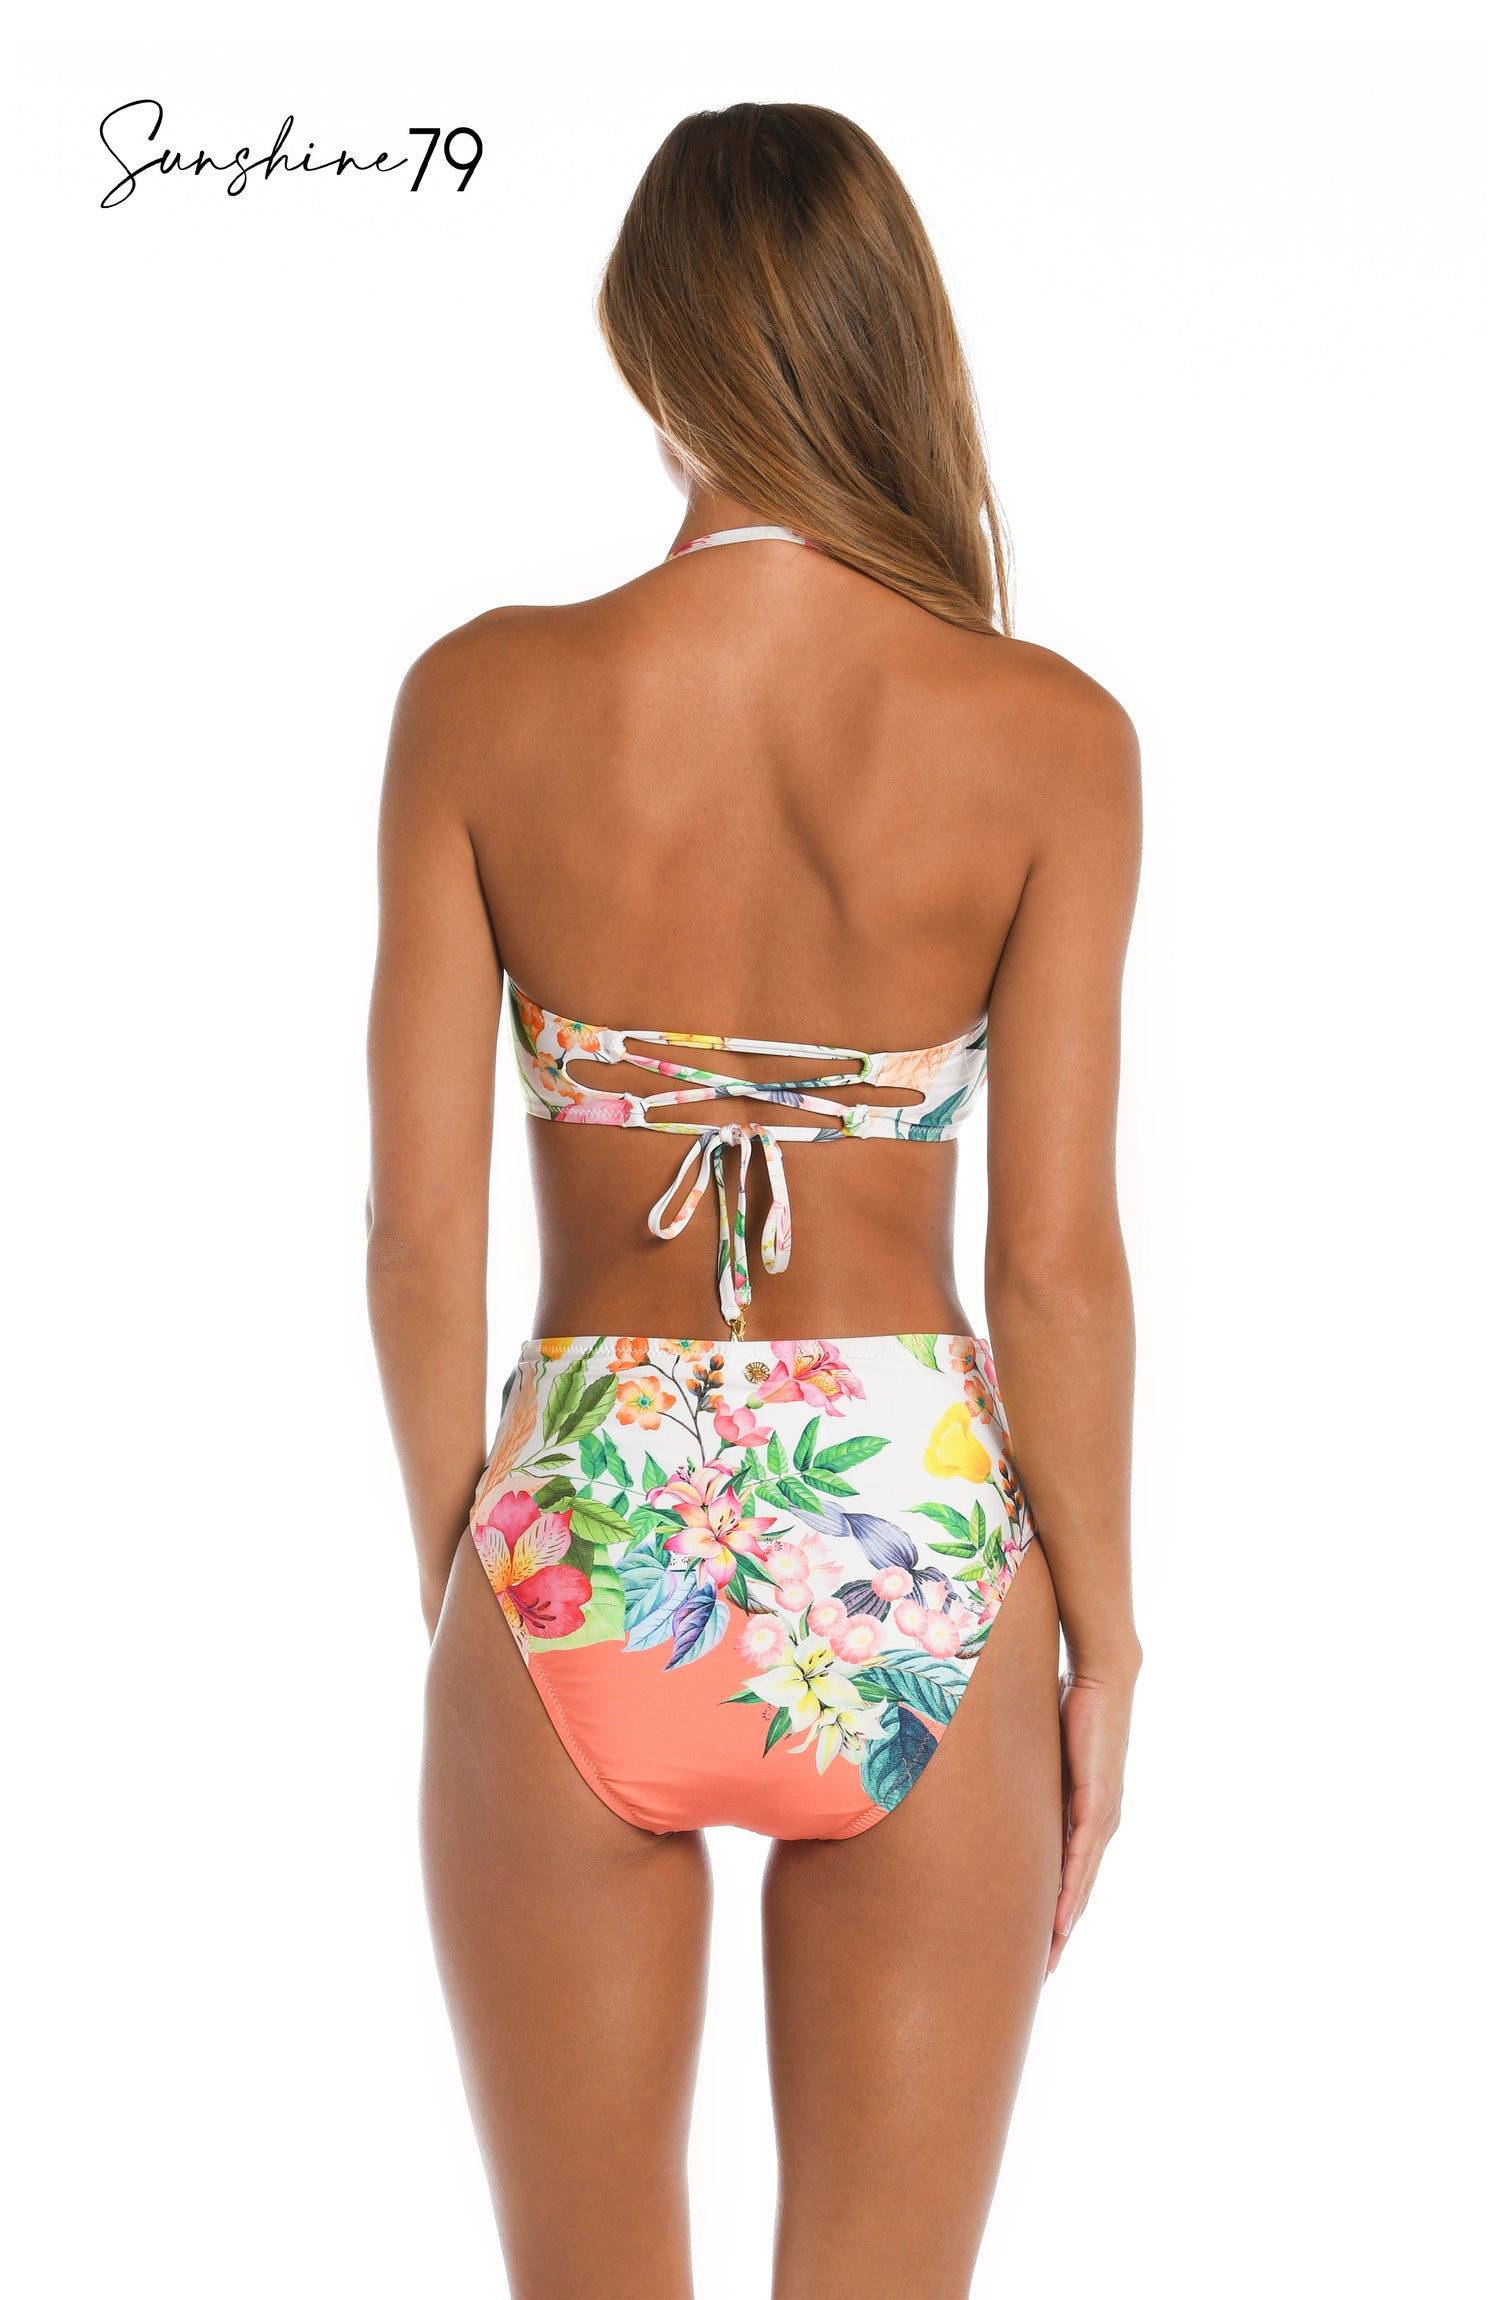 Model is wearing a coral multicolored floral printed bandeau bikini top from our Sunshine 79 brand.